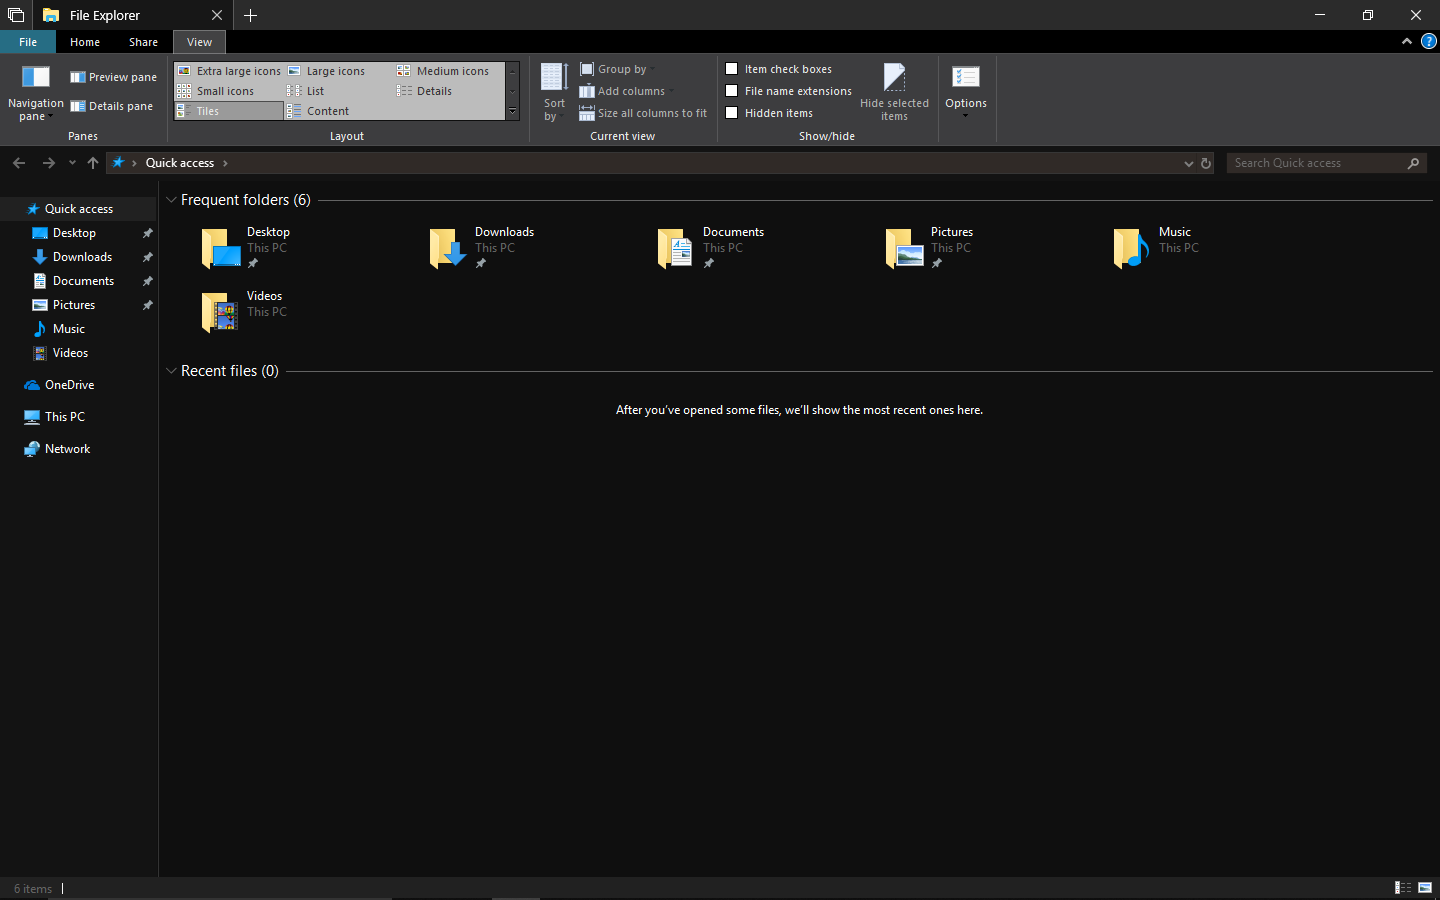 Issues with File explorer in dark theme after Windows update. ba28c750-6c8c-4abf-98d8-17449977f83d?upload=true.png